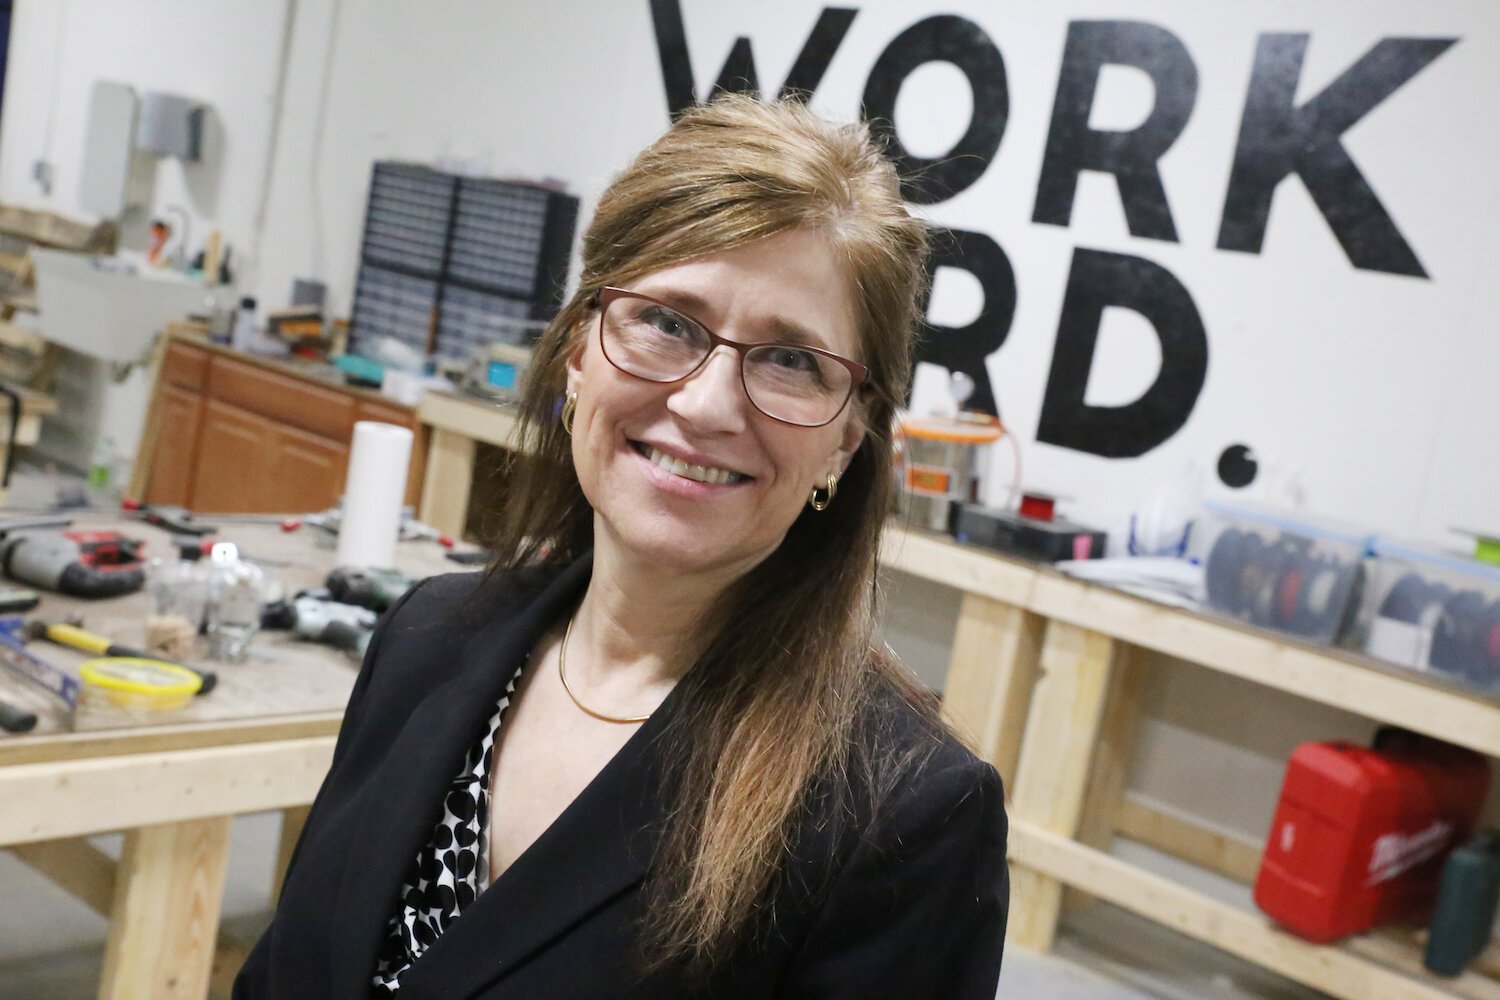 Monica Miller of Decatur is the entrepreneur behind the Glasses Gripper.